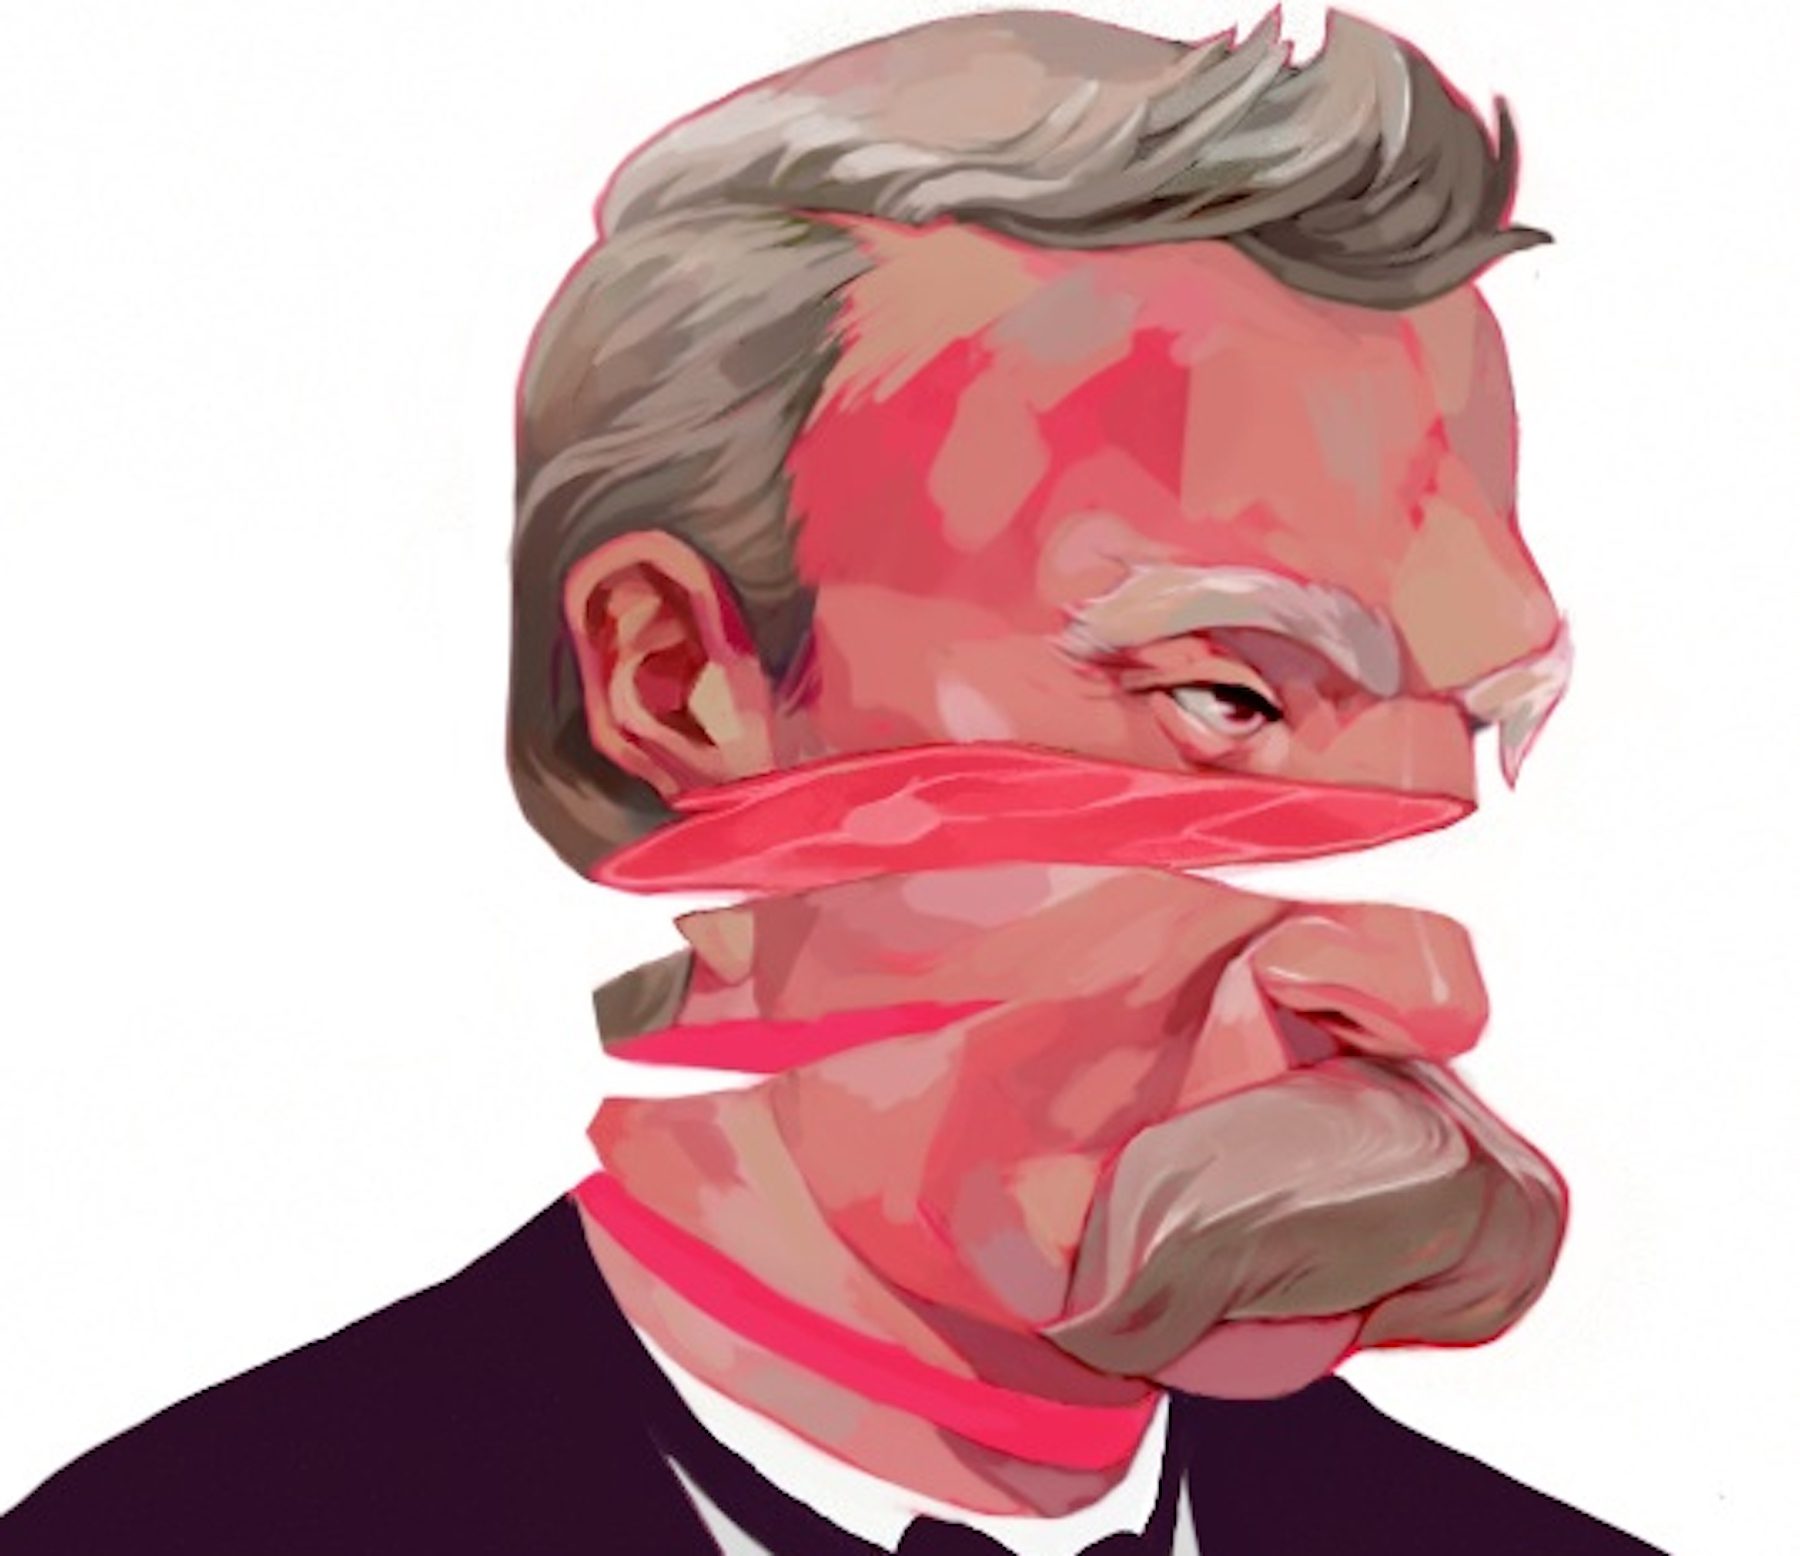 Abstract of philosopher Nietzsche, with head appearing sliced into segments as he stares off into distance. 